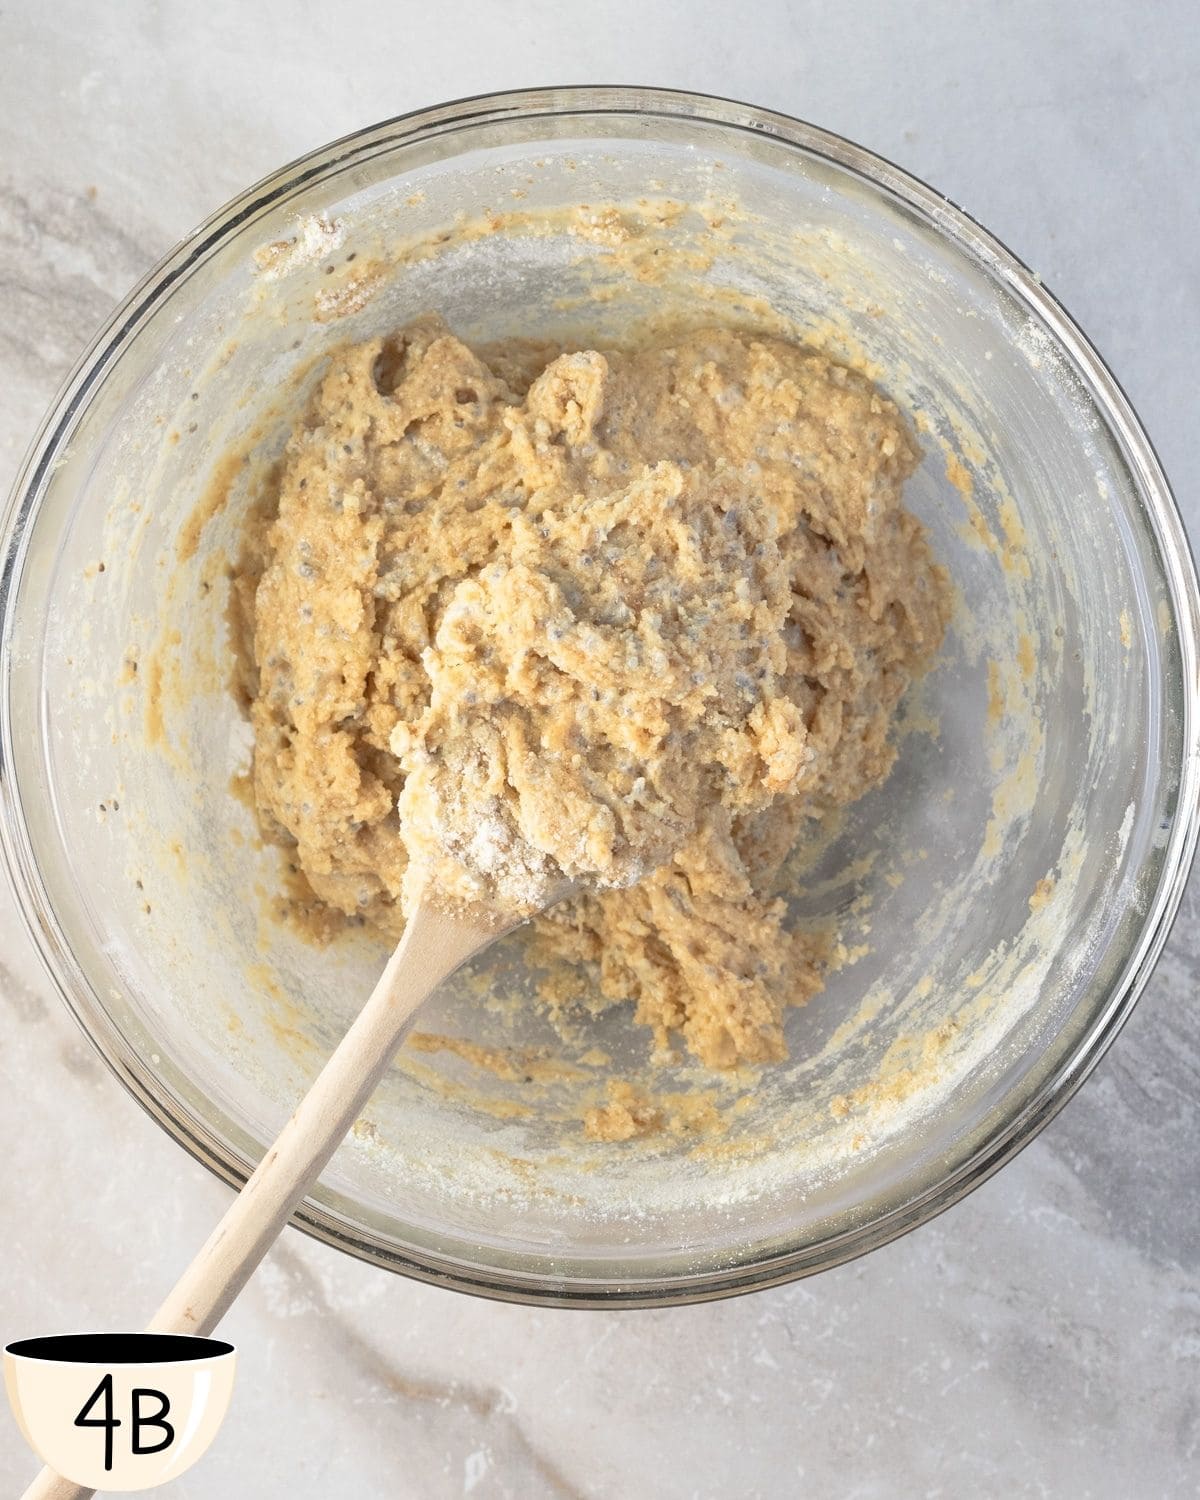 A glass bowl with a gluten free muffin batter being mixed together to show the consistency of the batter while prepping this recipe.